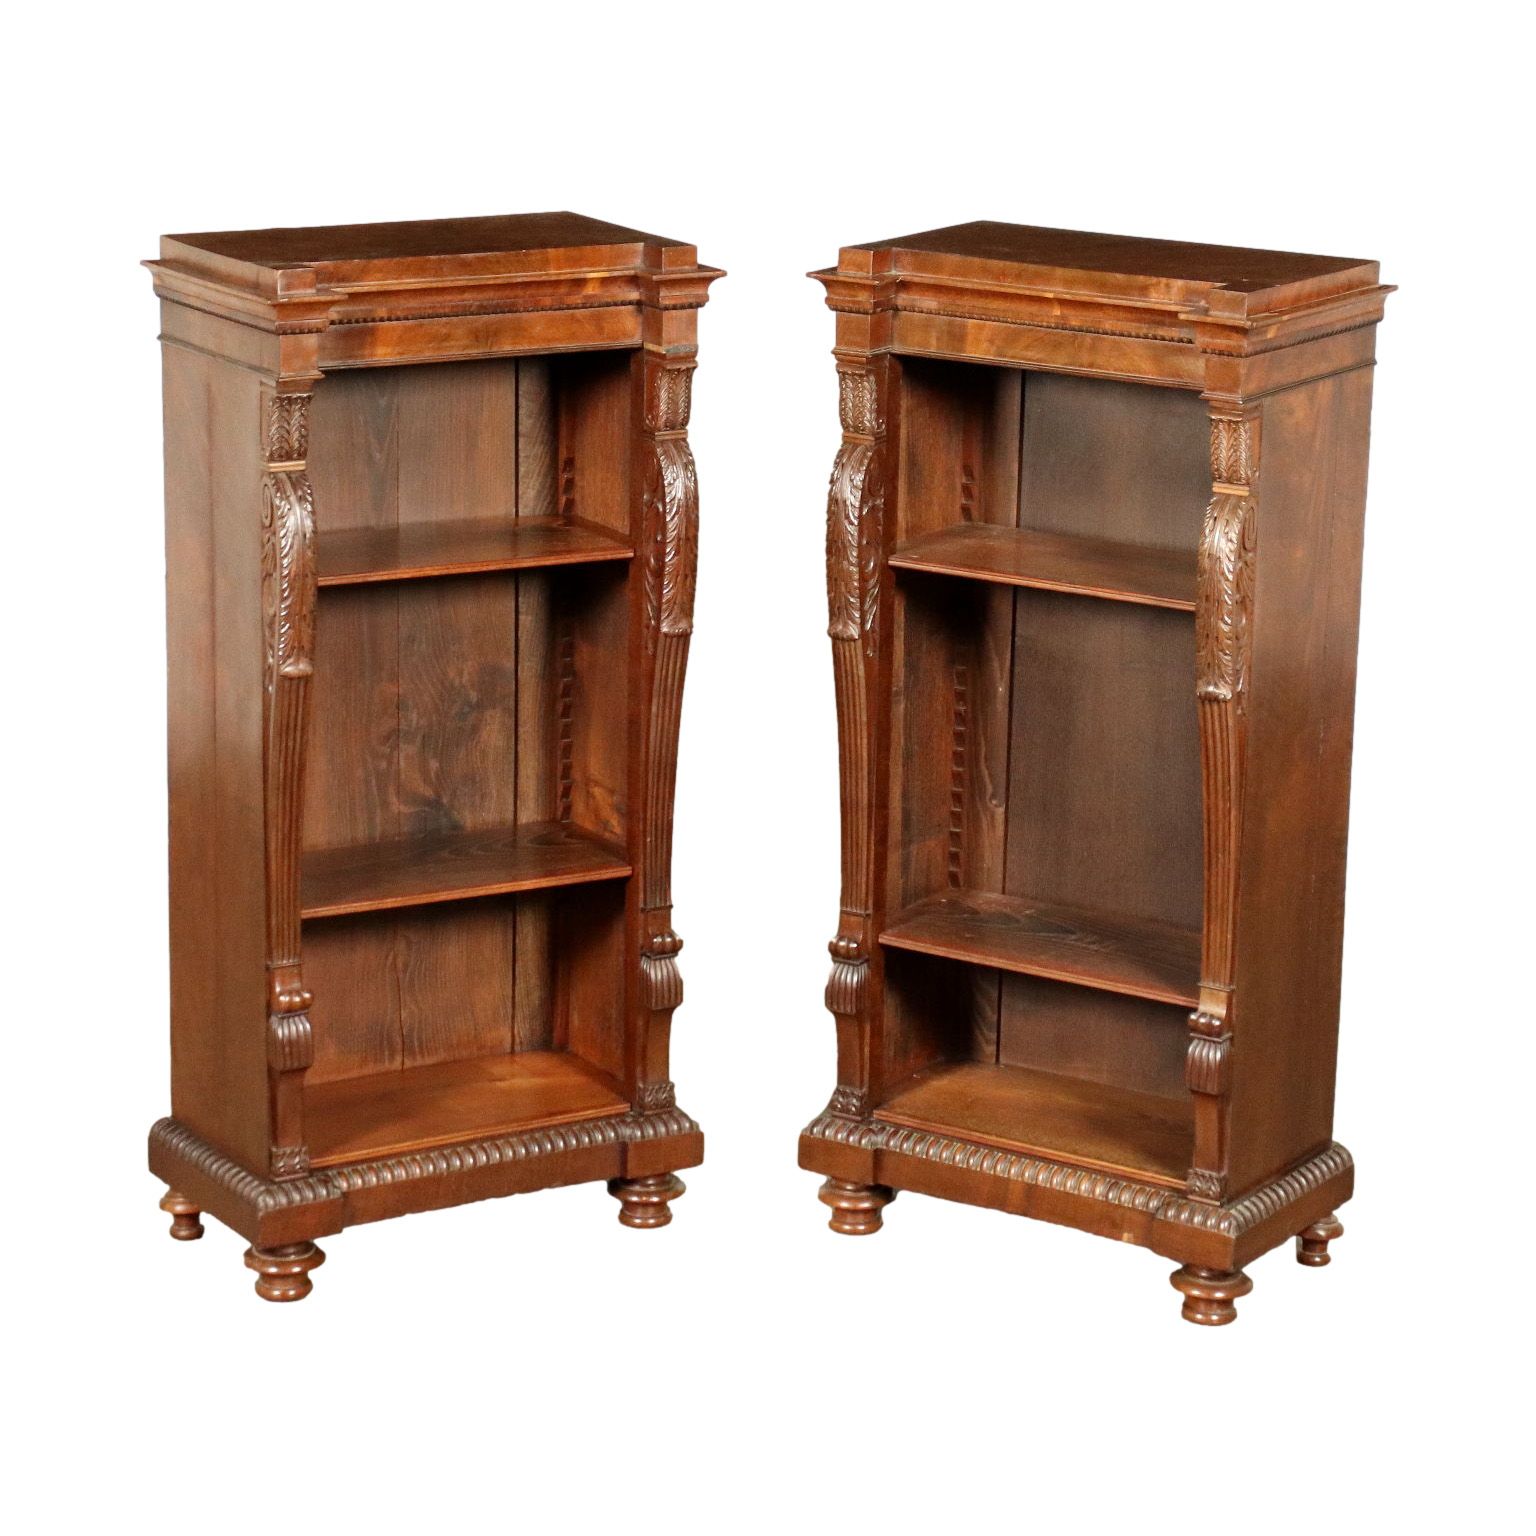 Pair Of Mahogany And Oak Bookcases With Open Shelves, 19th Century | Intondo Throughout Bookcases With Open Shelves (View 12 of 15)